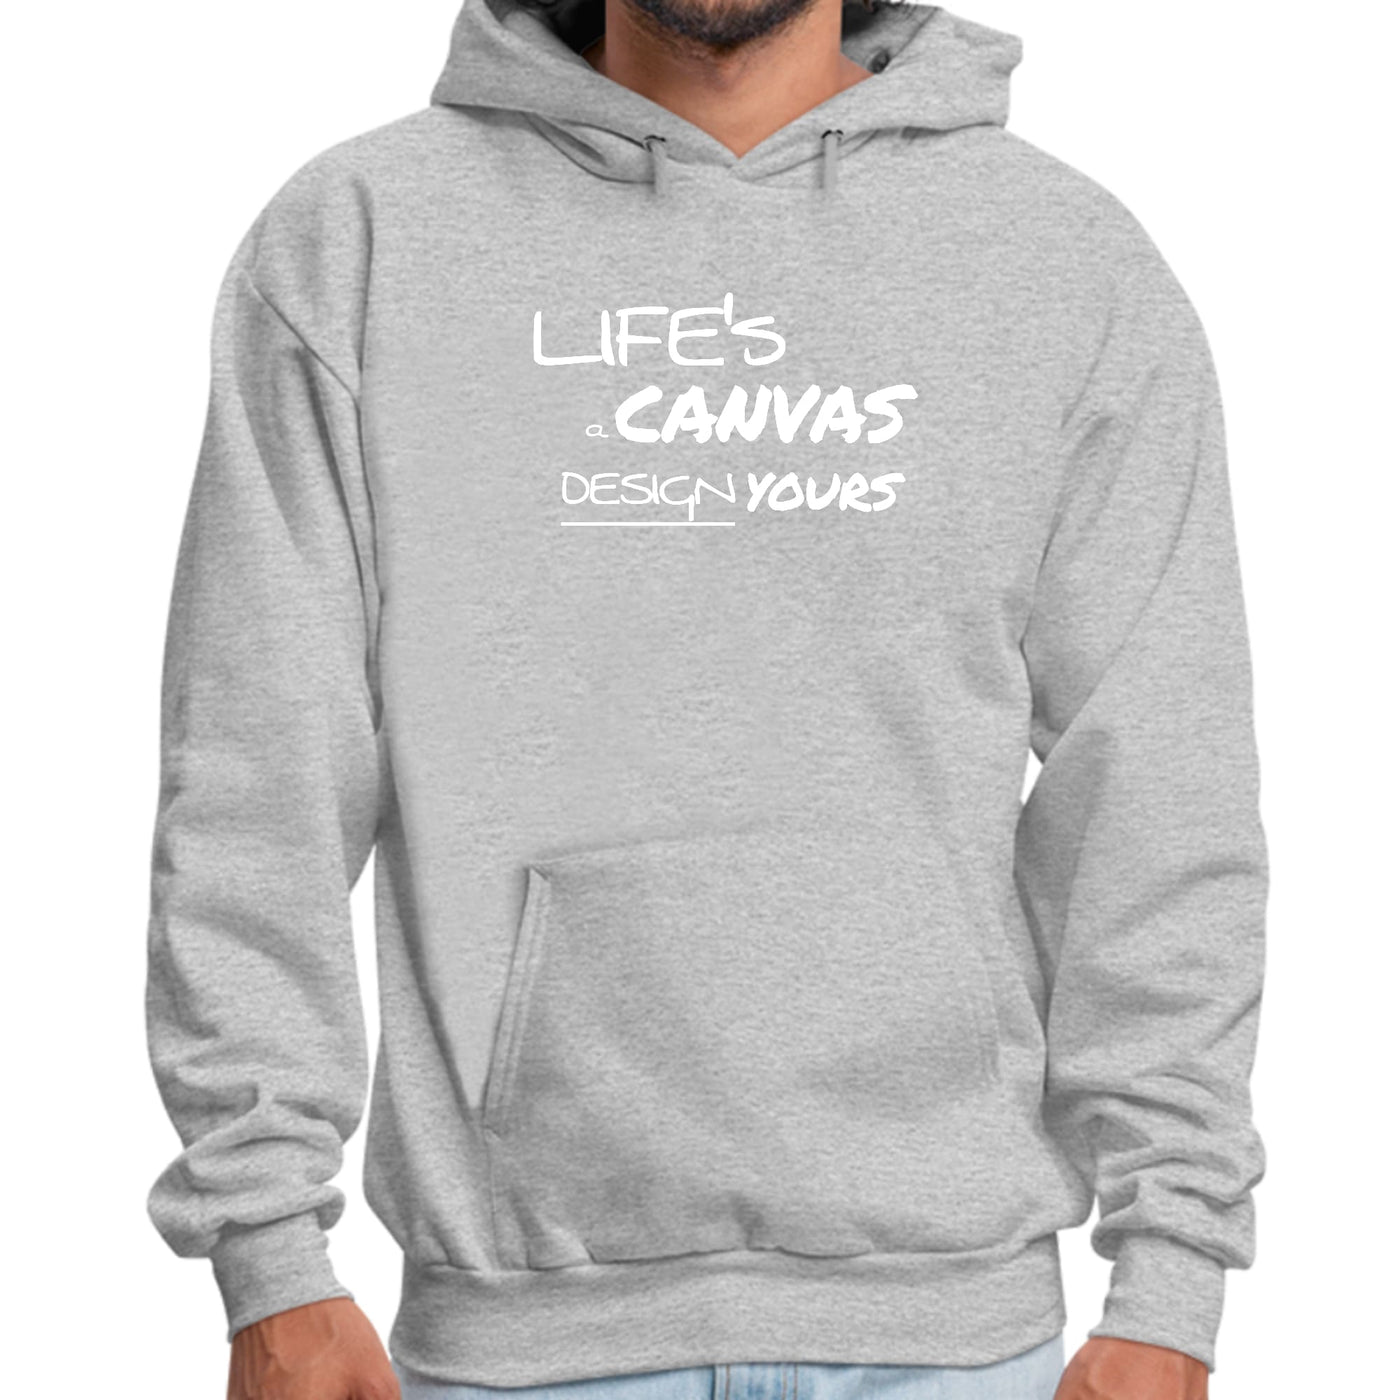 Graphic Hoodie Life’s a Canvas Design Yours Motivational Aspiration - Unisex